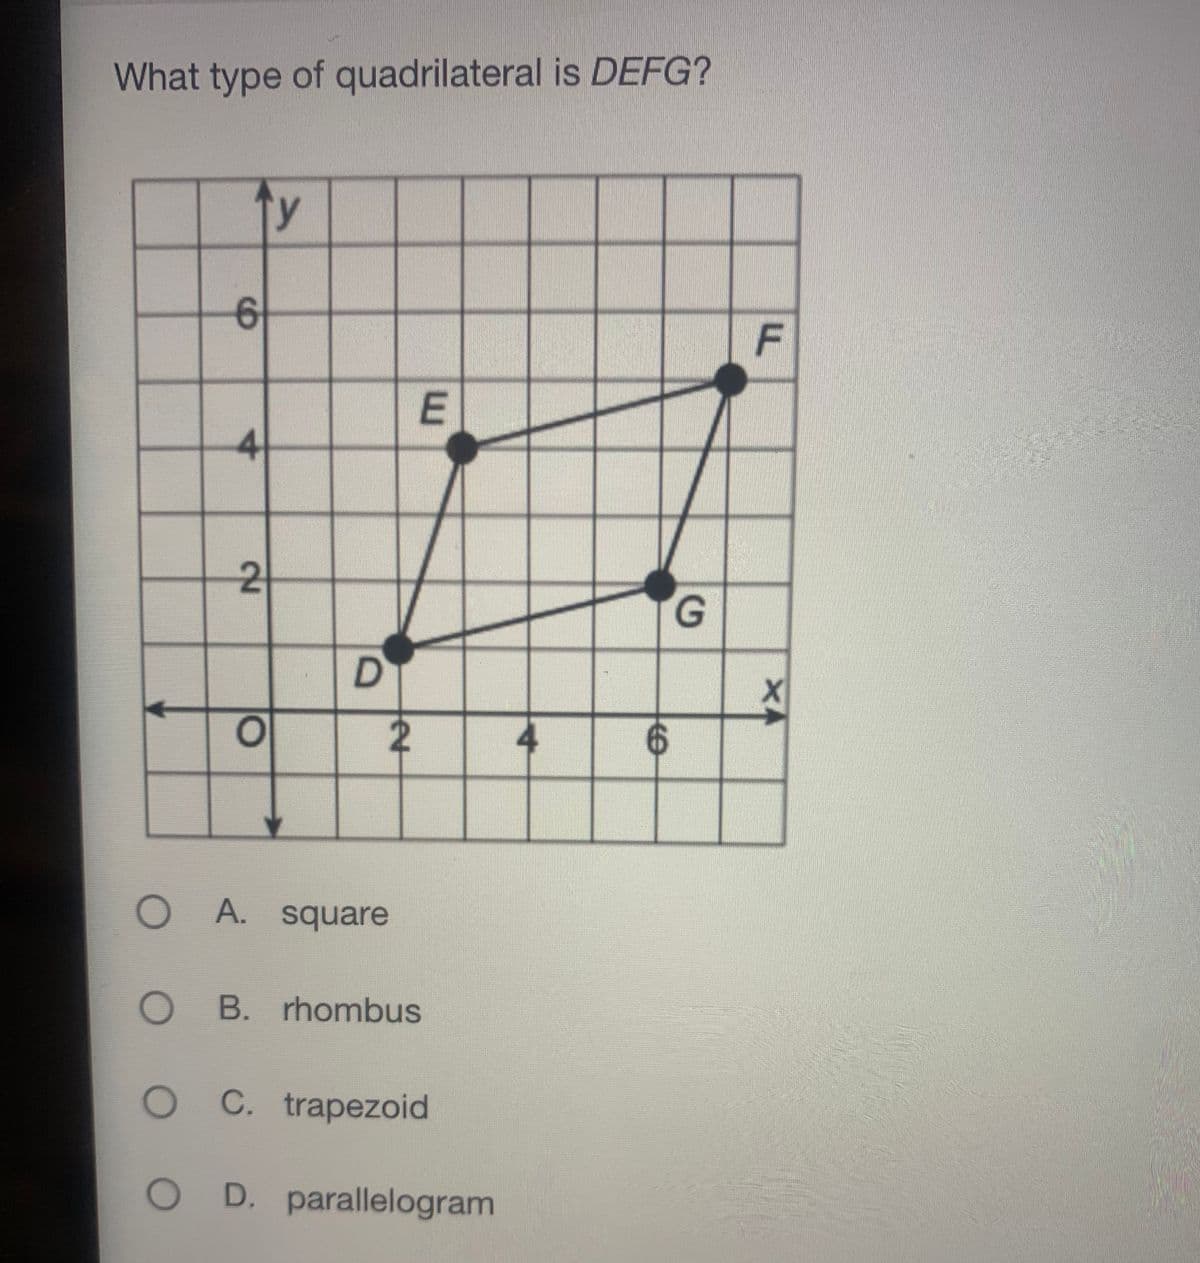 What type of quadrilateral is DEFG?
ty
E
4
O A. square
O B. rhombus
C. trapezoid
OD. parallelogram
F.
D.
2.
